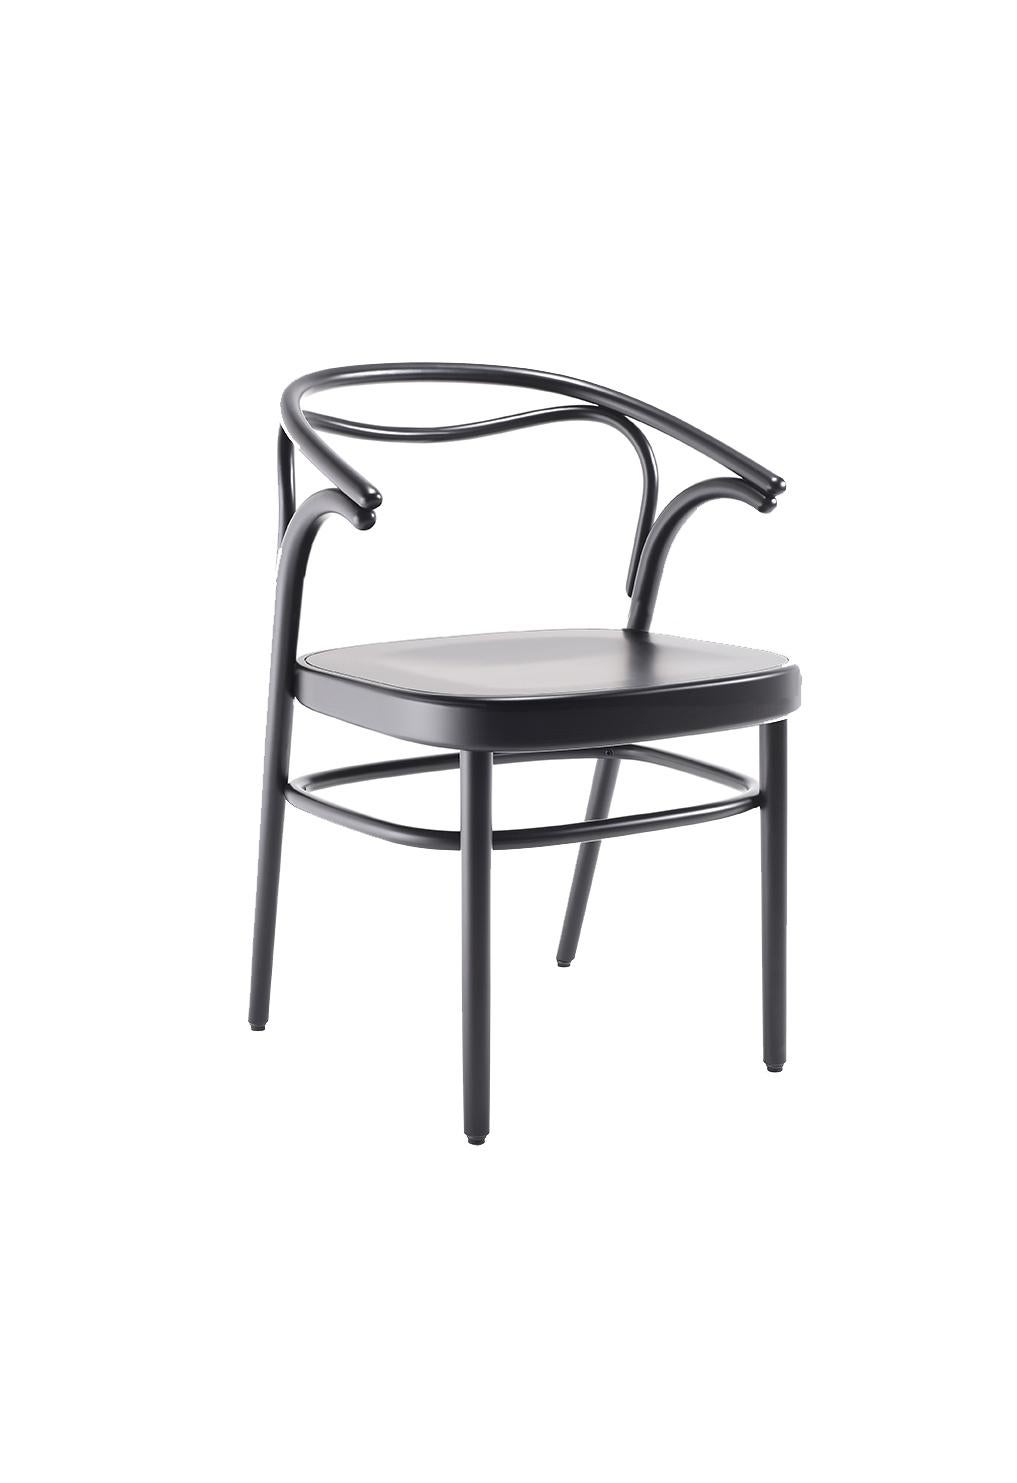 Austrian Gebrüder Thonet Vienna Beaulieu Armchair with Plywood Seat by Philippe Nigro For Sale